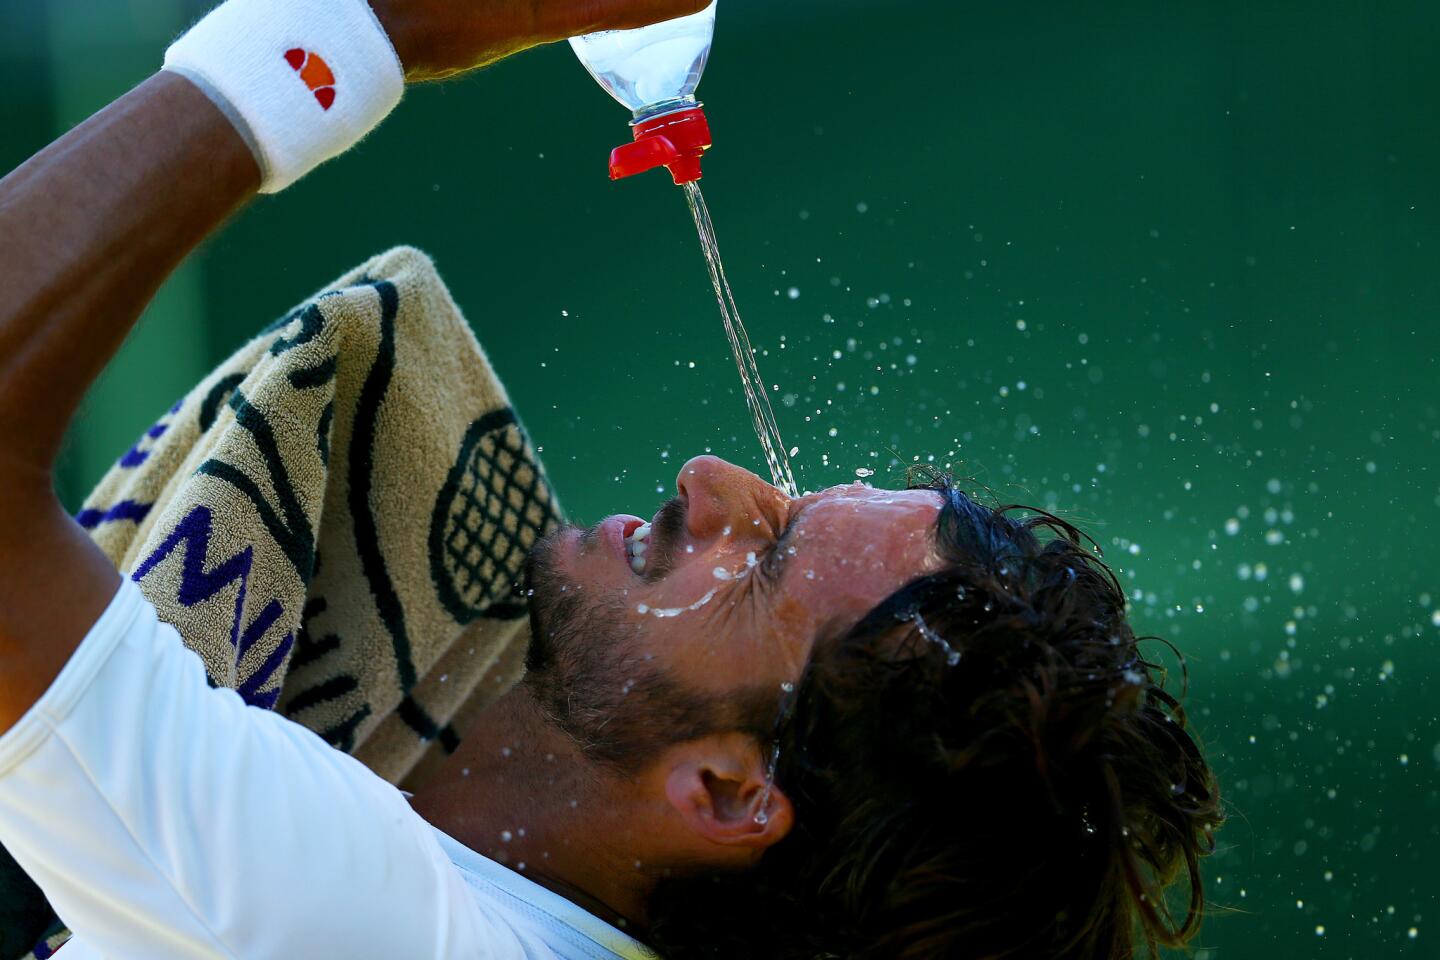 LONDON, ENGLAND - JUNE 30: Feliciano Lopez of Spain cools down in his Gentlemens Singles first round match against Steve Darcis of Belgium during day two of the Wimbledon Lawn Tennis Championships at the All England Lawn Tennis and Croquet Club on June 30, 2015 in London, England. (Photo by Clive Brunskill/Getty Images) ** OUTS - ELSENT, FPG - OUTS * NM, PH, VA if sourced by CT, LA or MoD **